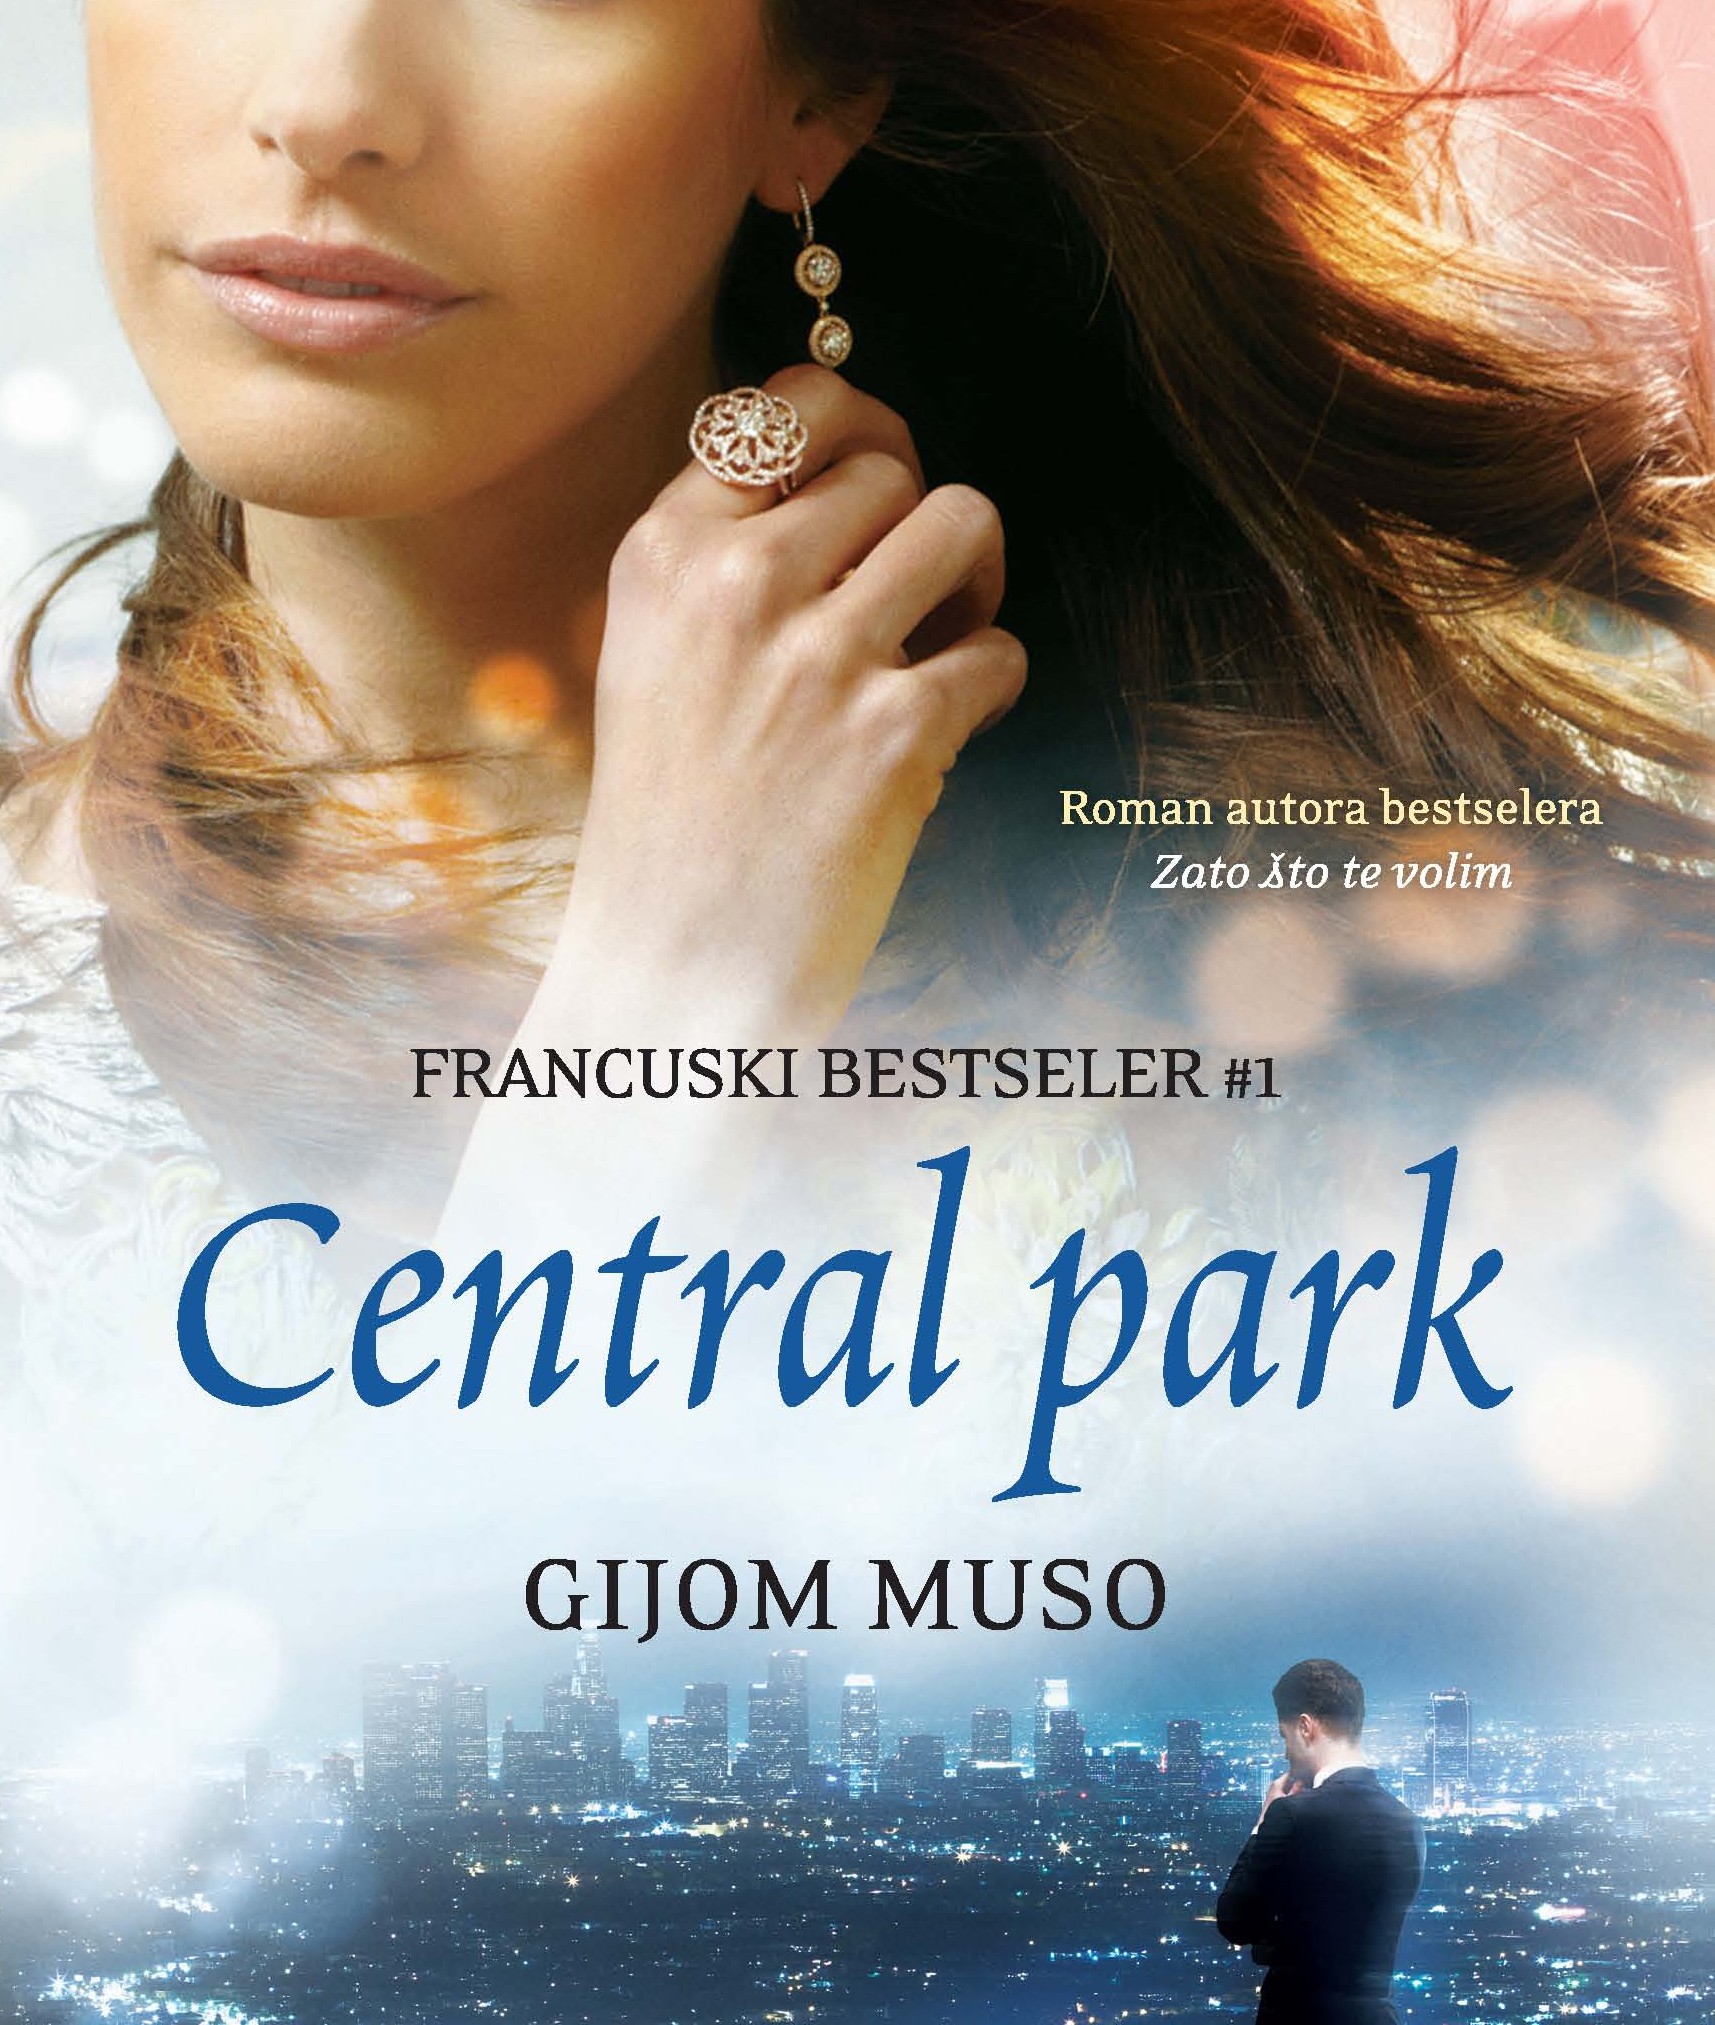 Central Park [French Version] by Guillaume Musso - Audiobook